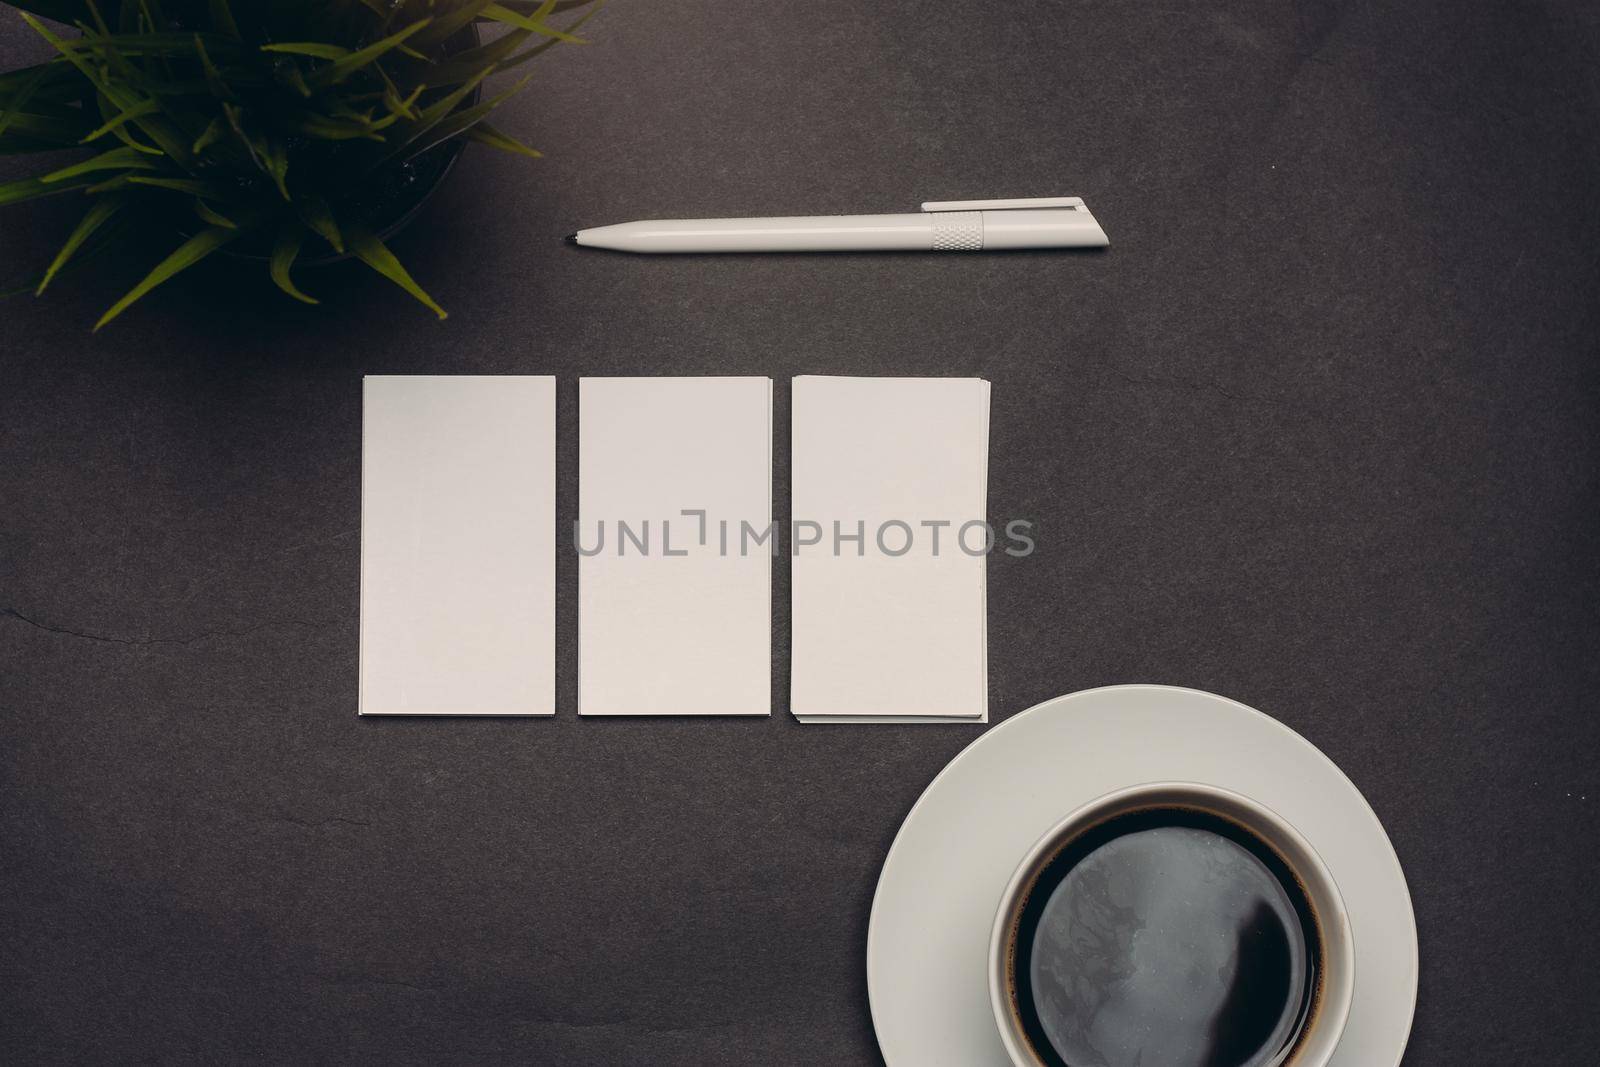 business cards on table and coffee cup pen top view by SHOTPRIME